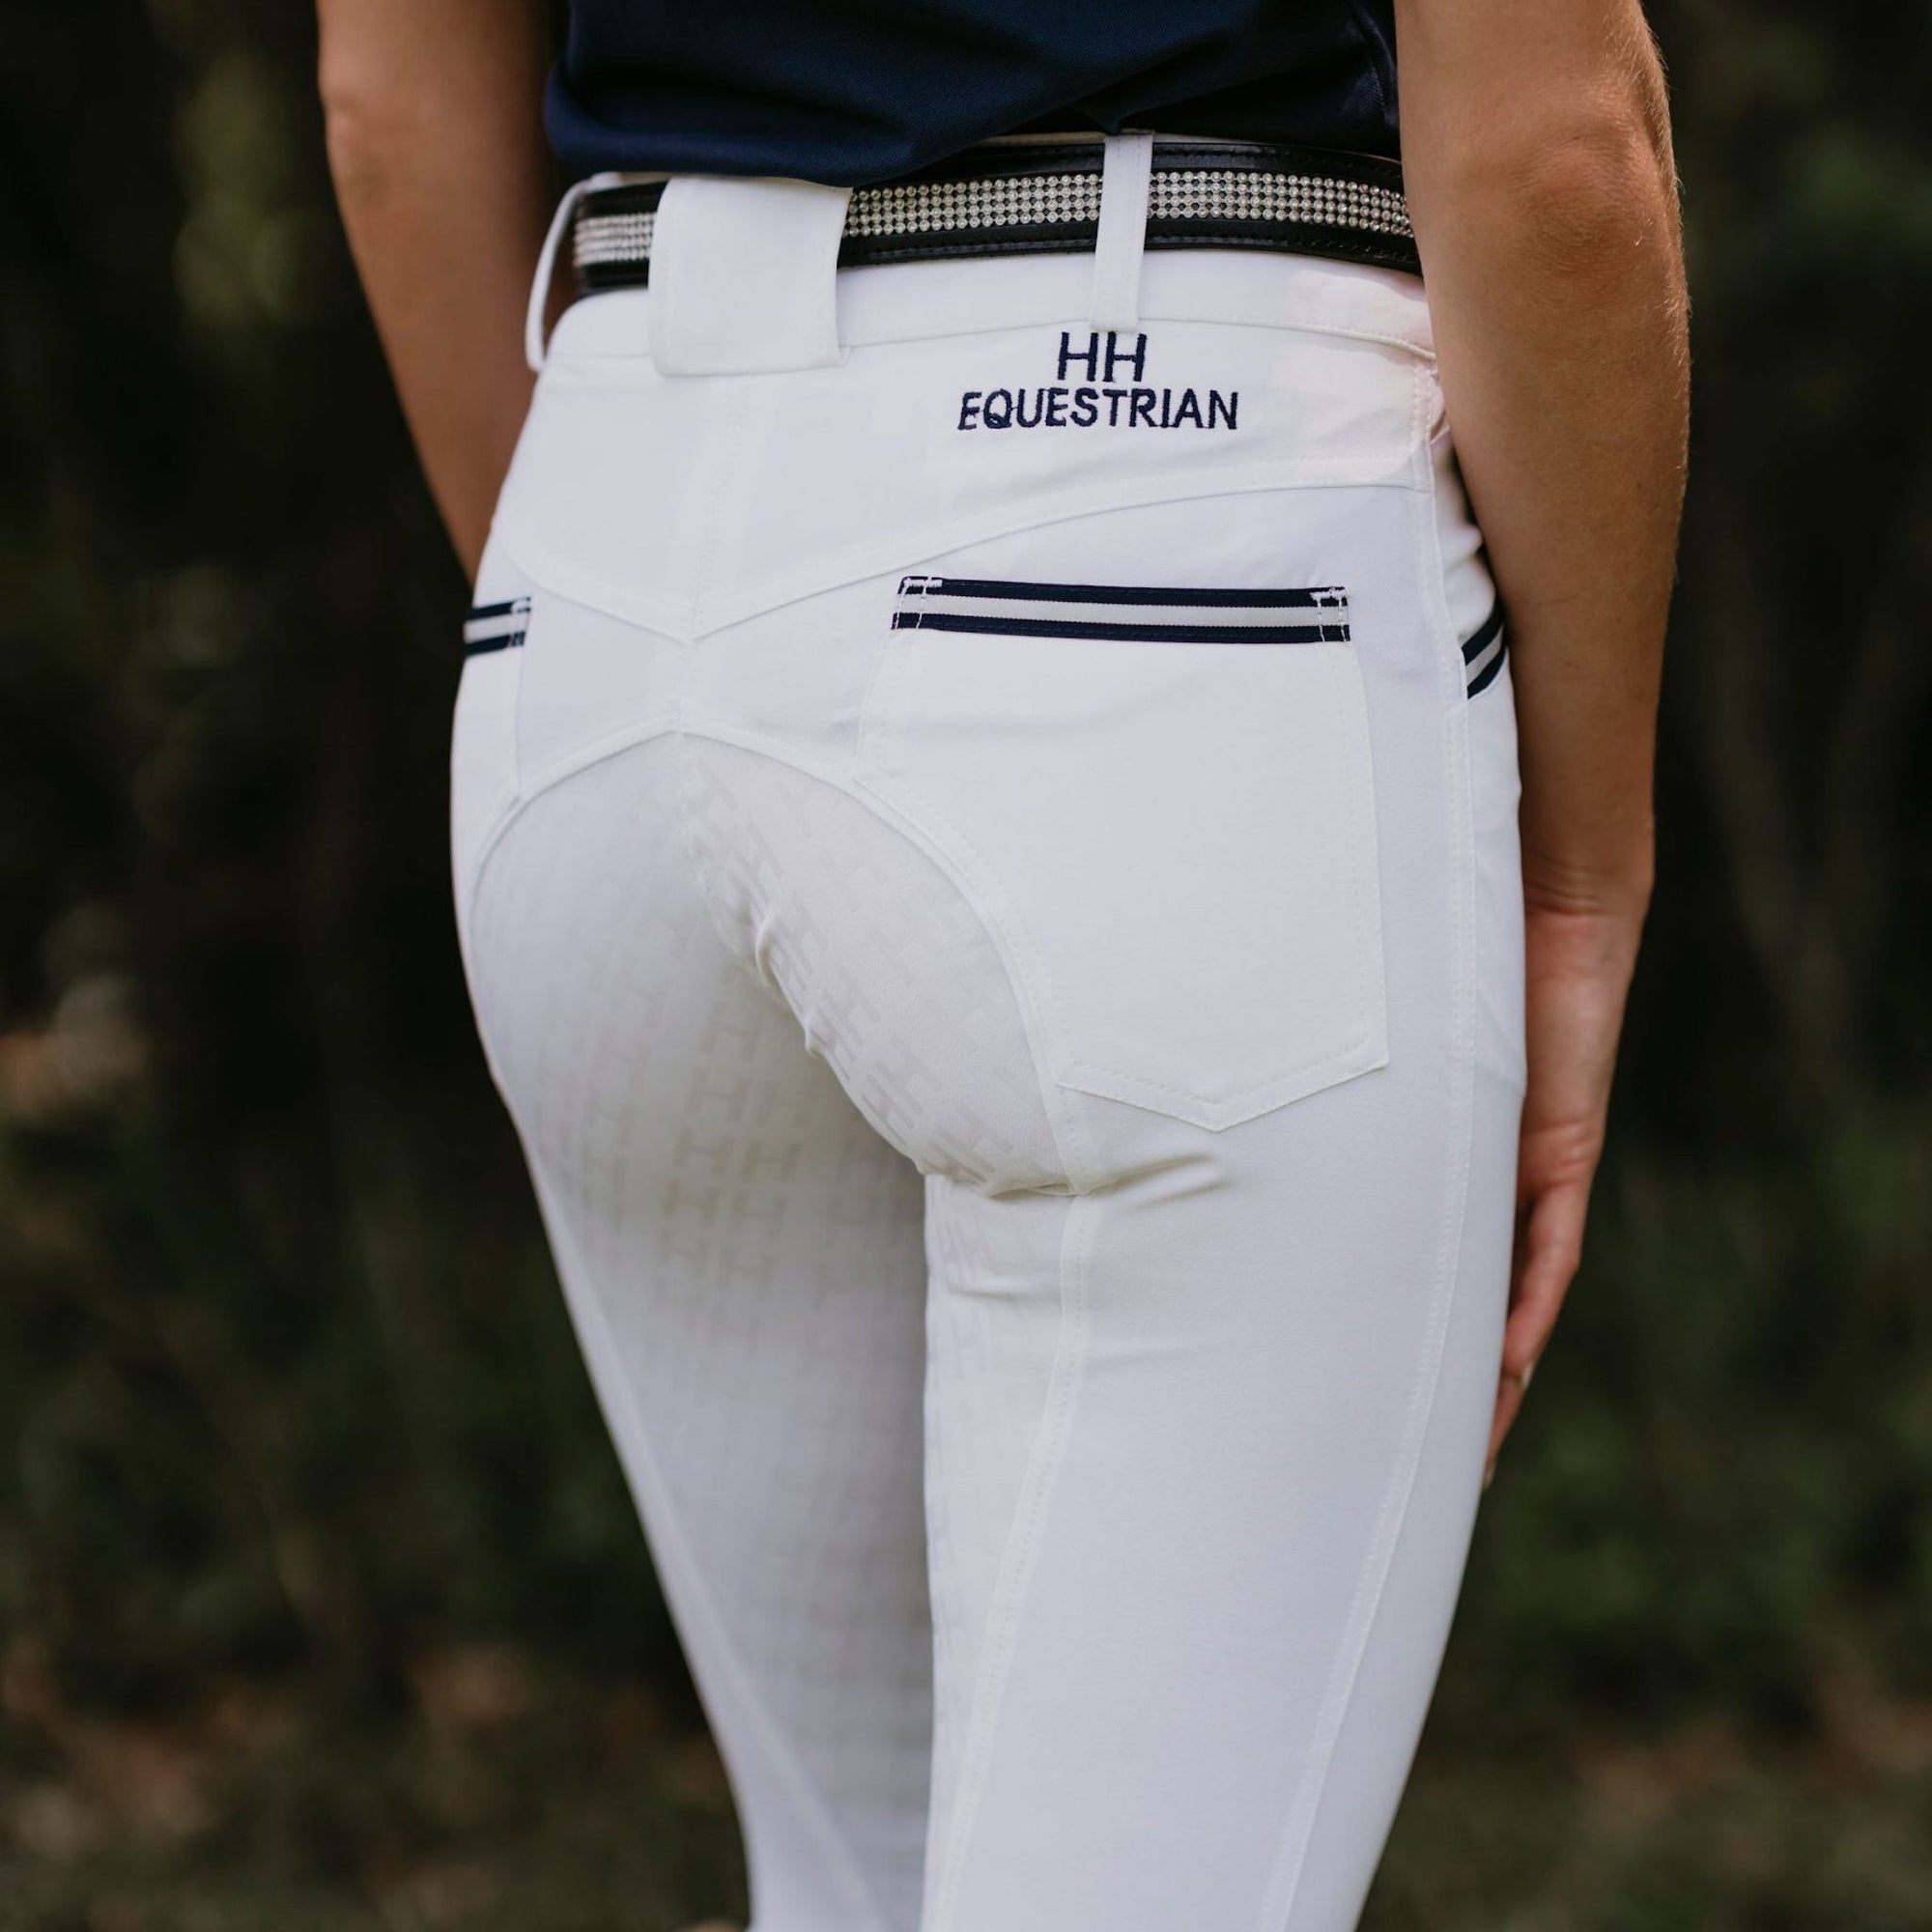 Lady wearing white breeches with navy stripes on front pockets.